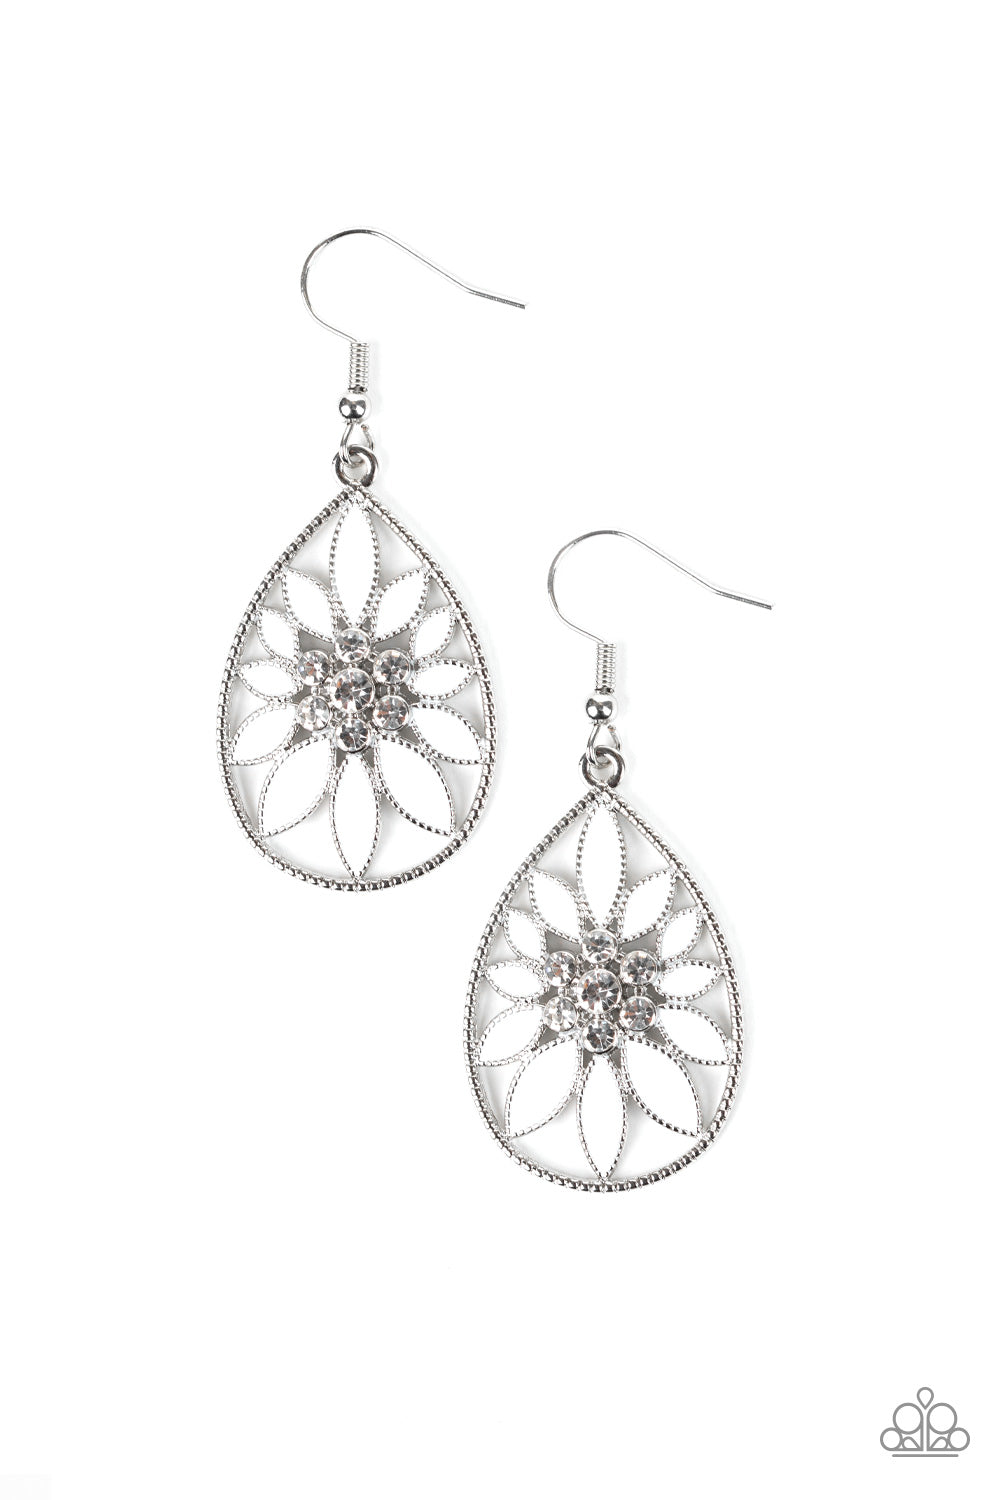 Paparazzi Earrings - Floral Morals - White